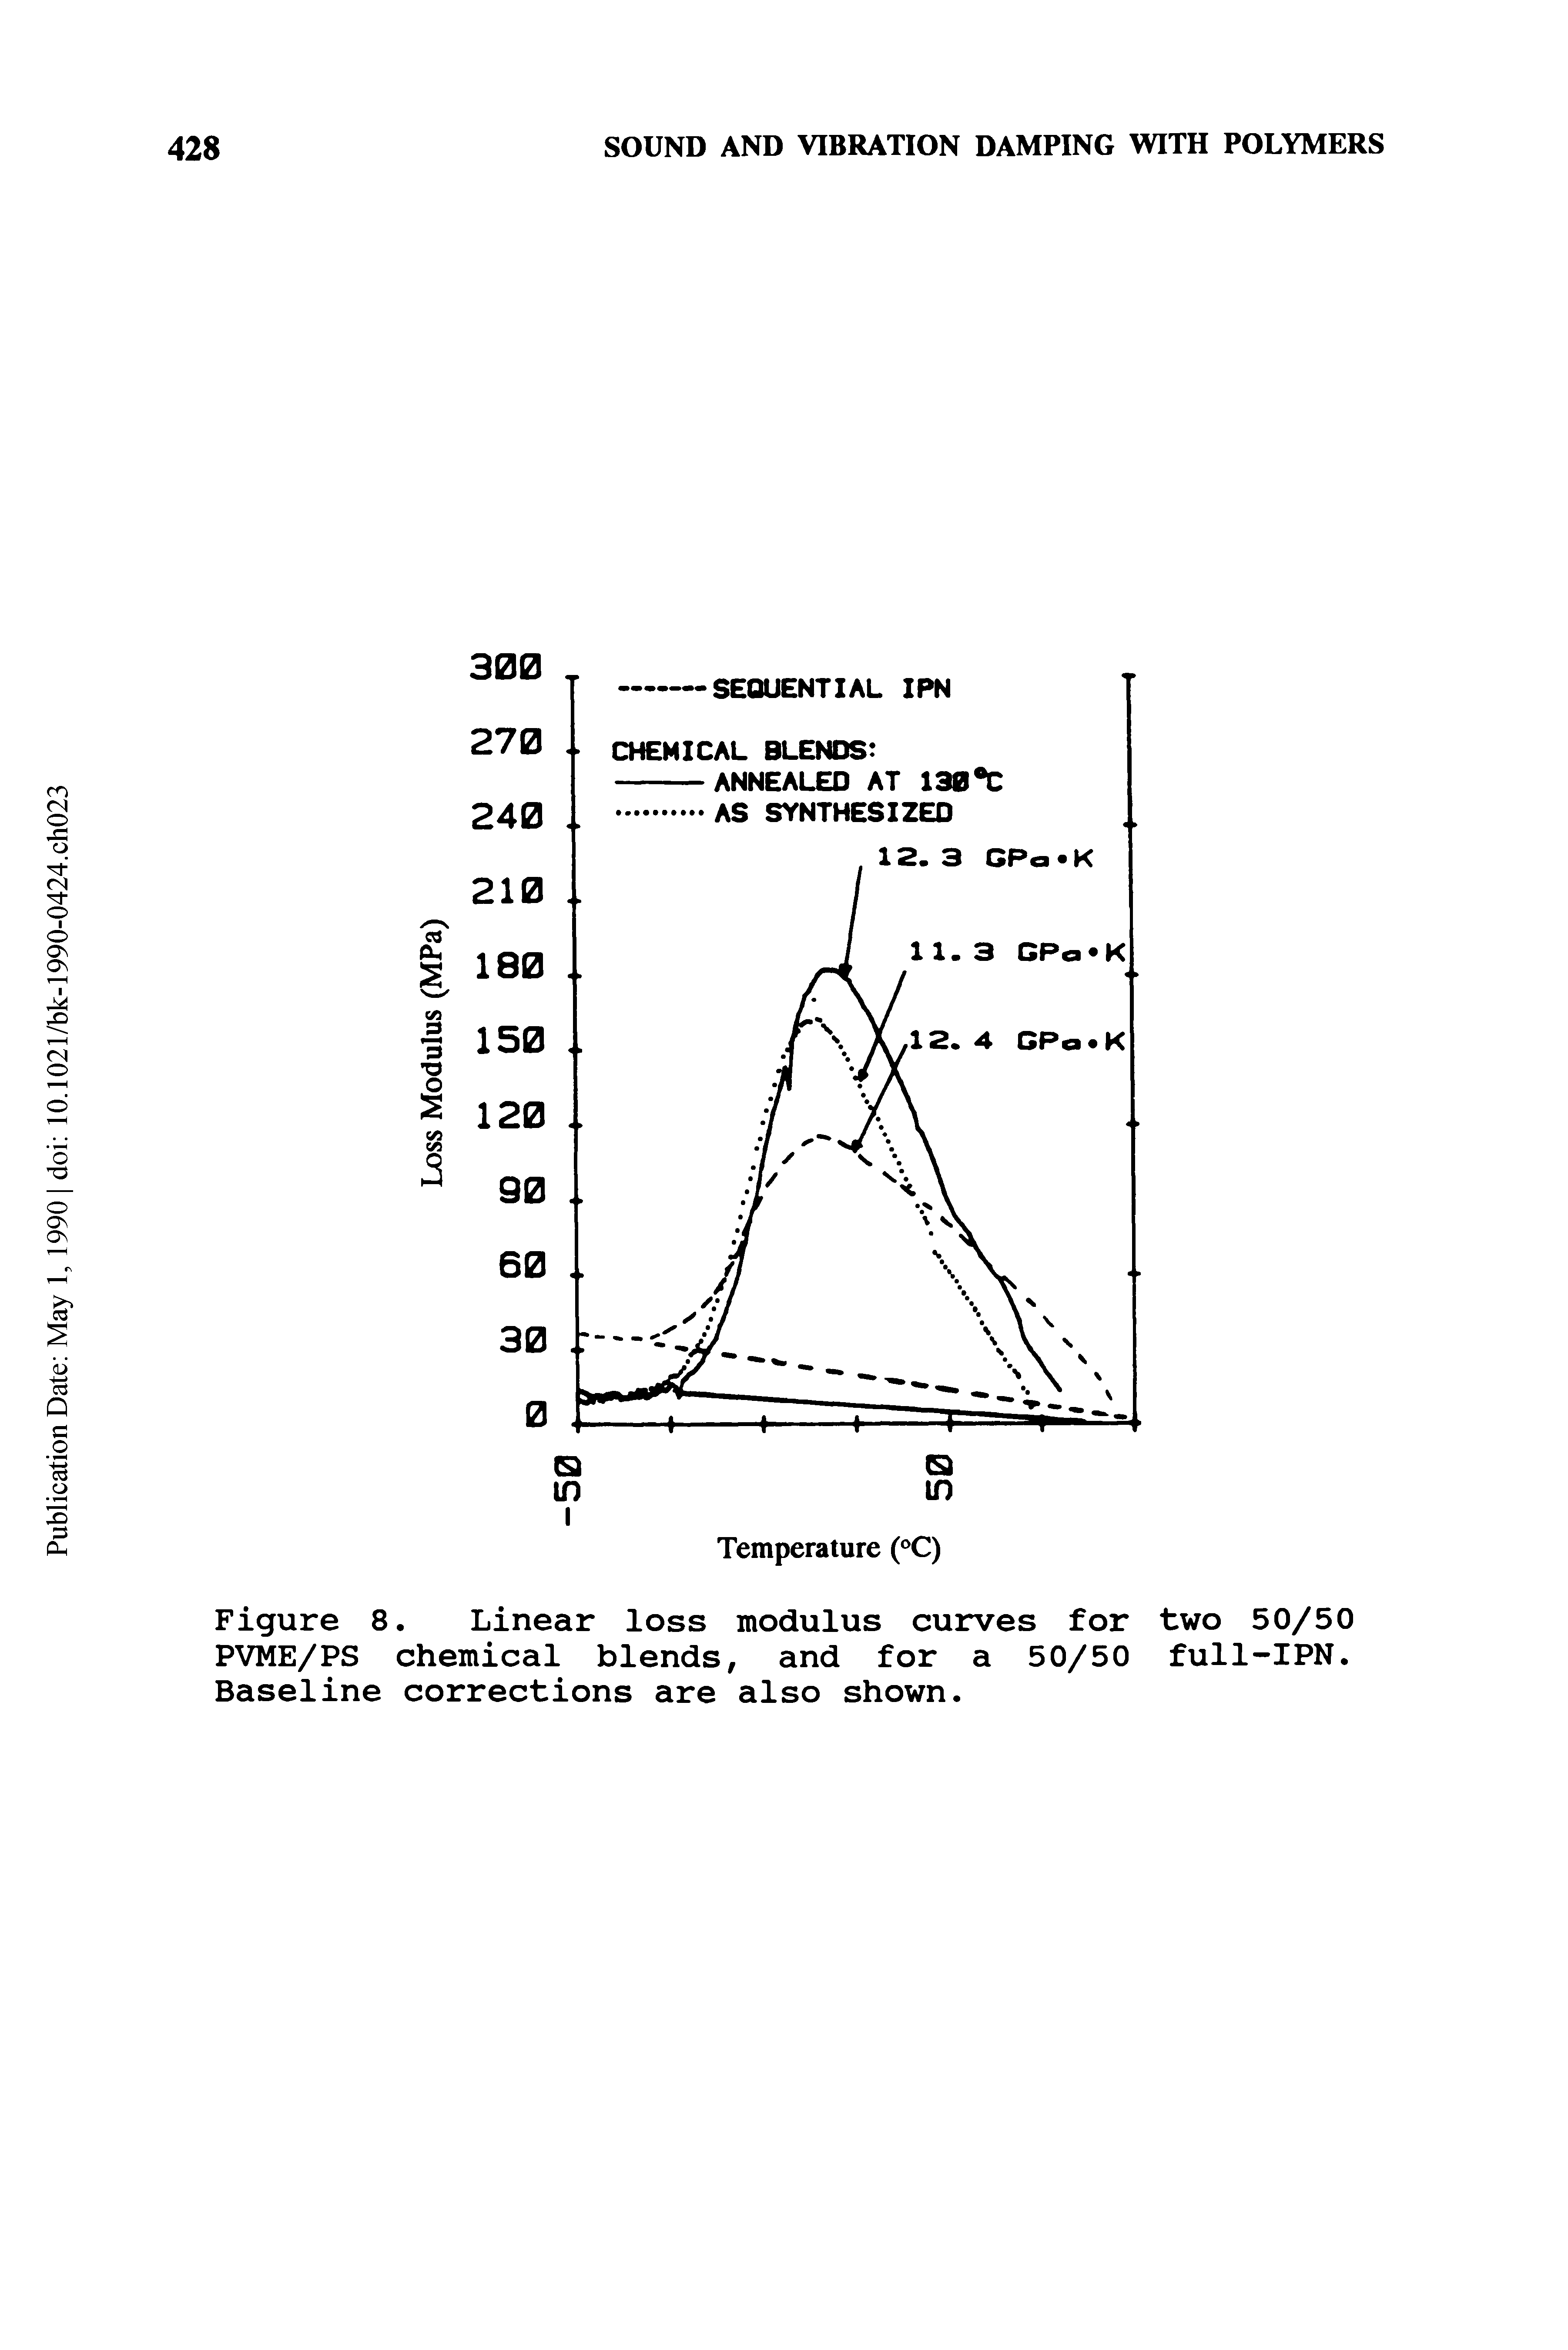 Figure 8. Linear loss modulus curves for two 50/50 PVME/PS chemical blends, and for a 50/50 full-IPN. Baseline corrections are also shown.